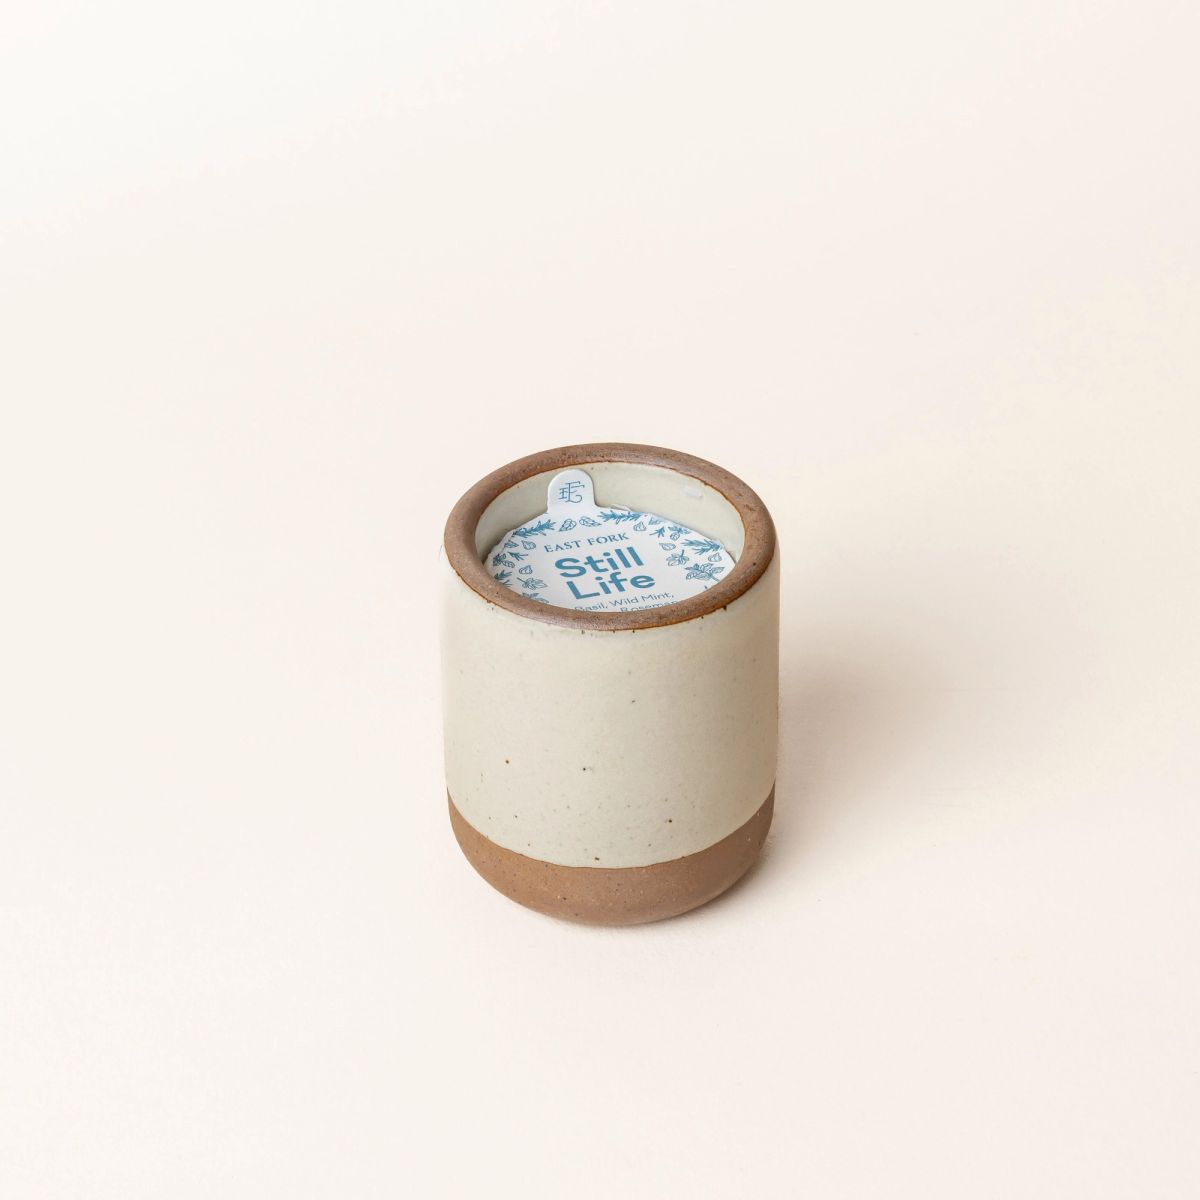 Small ceramic vessel in  warm, tan-toned, off-white color with candle inside. On top is a packaging label sitting on top that reads "Still Life"